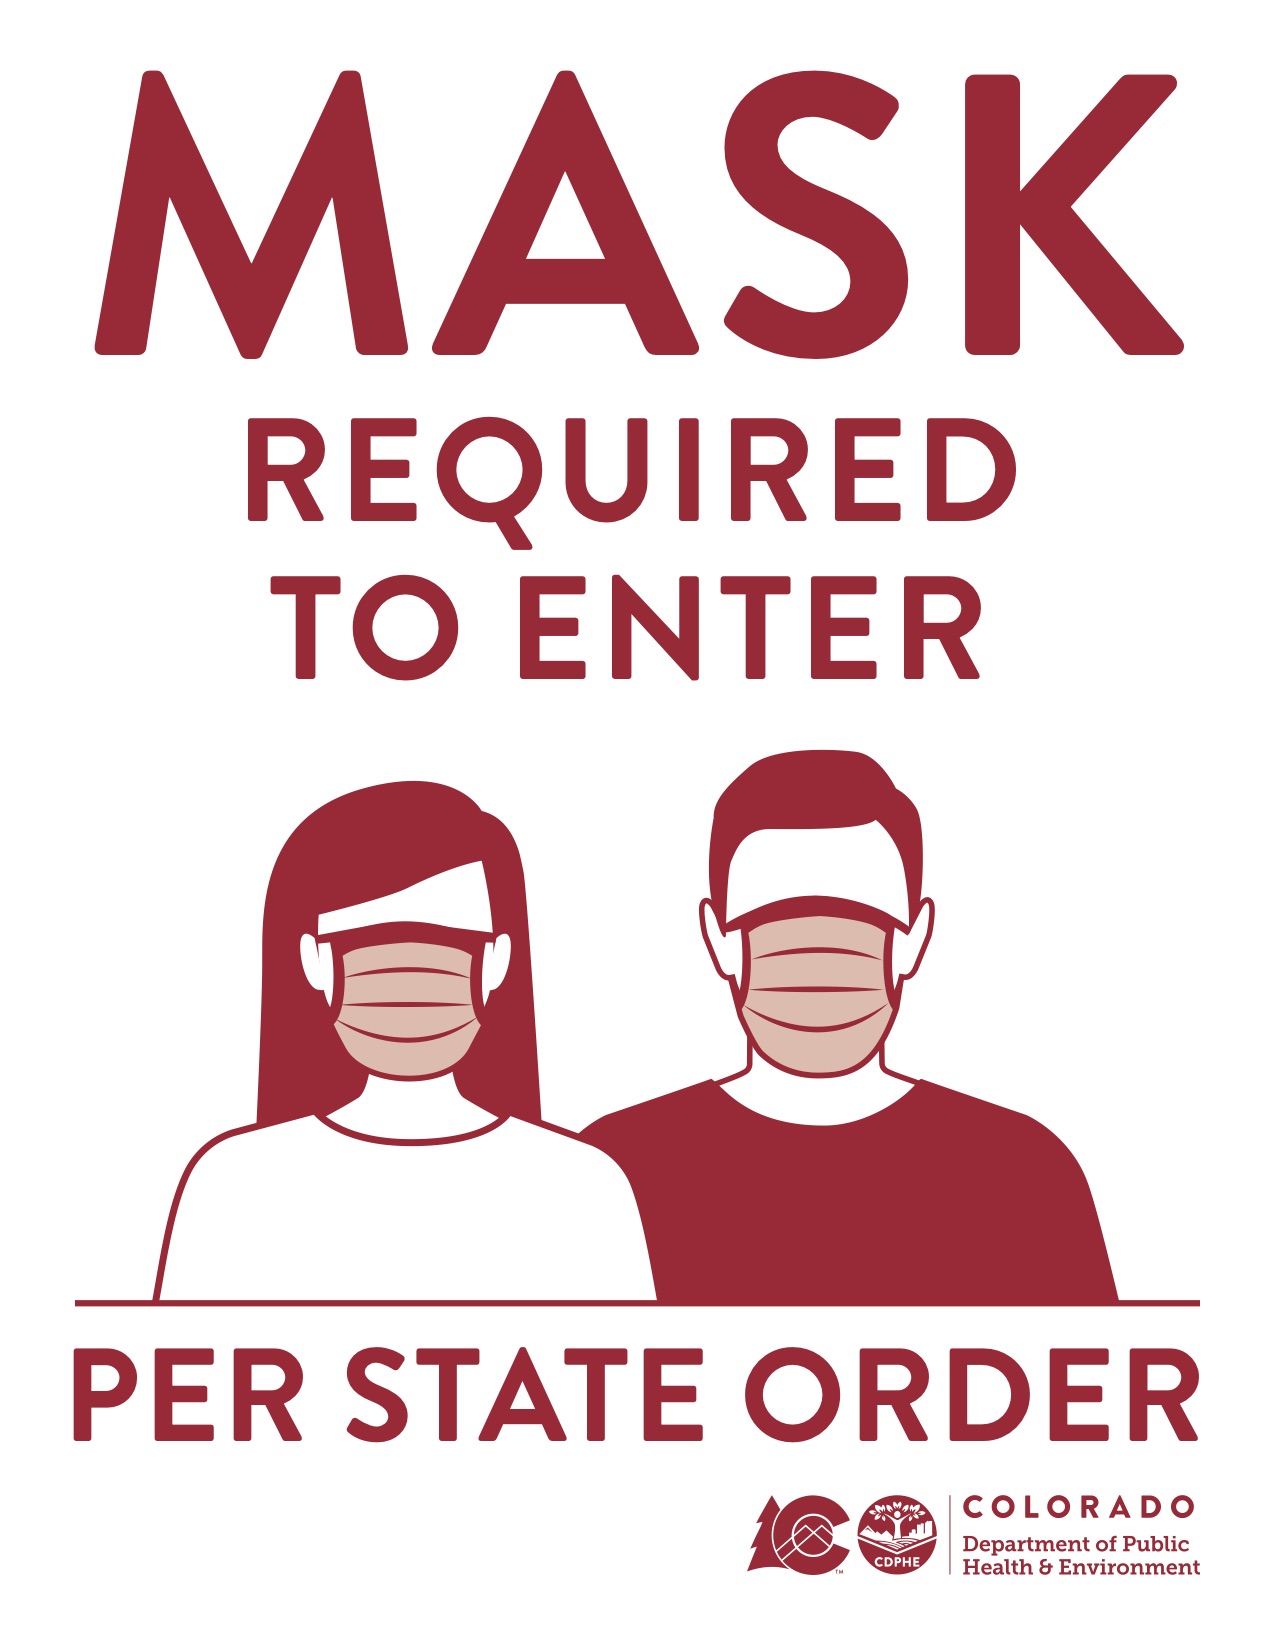 Statewide Mask Mandate Issued by Governor Jared Polis